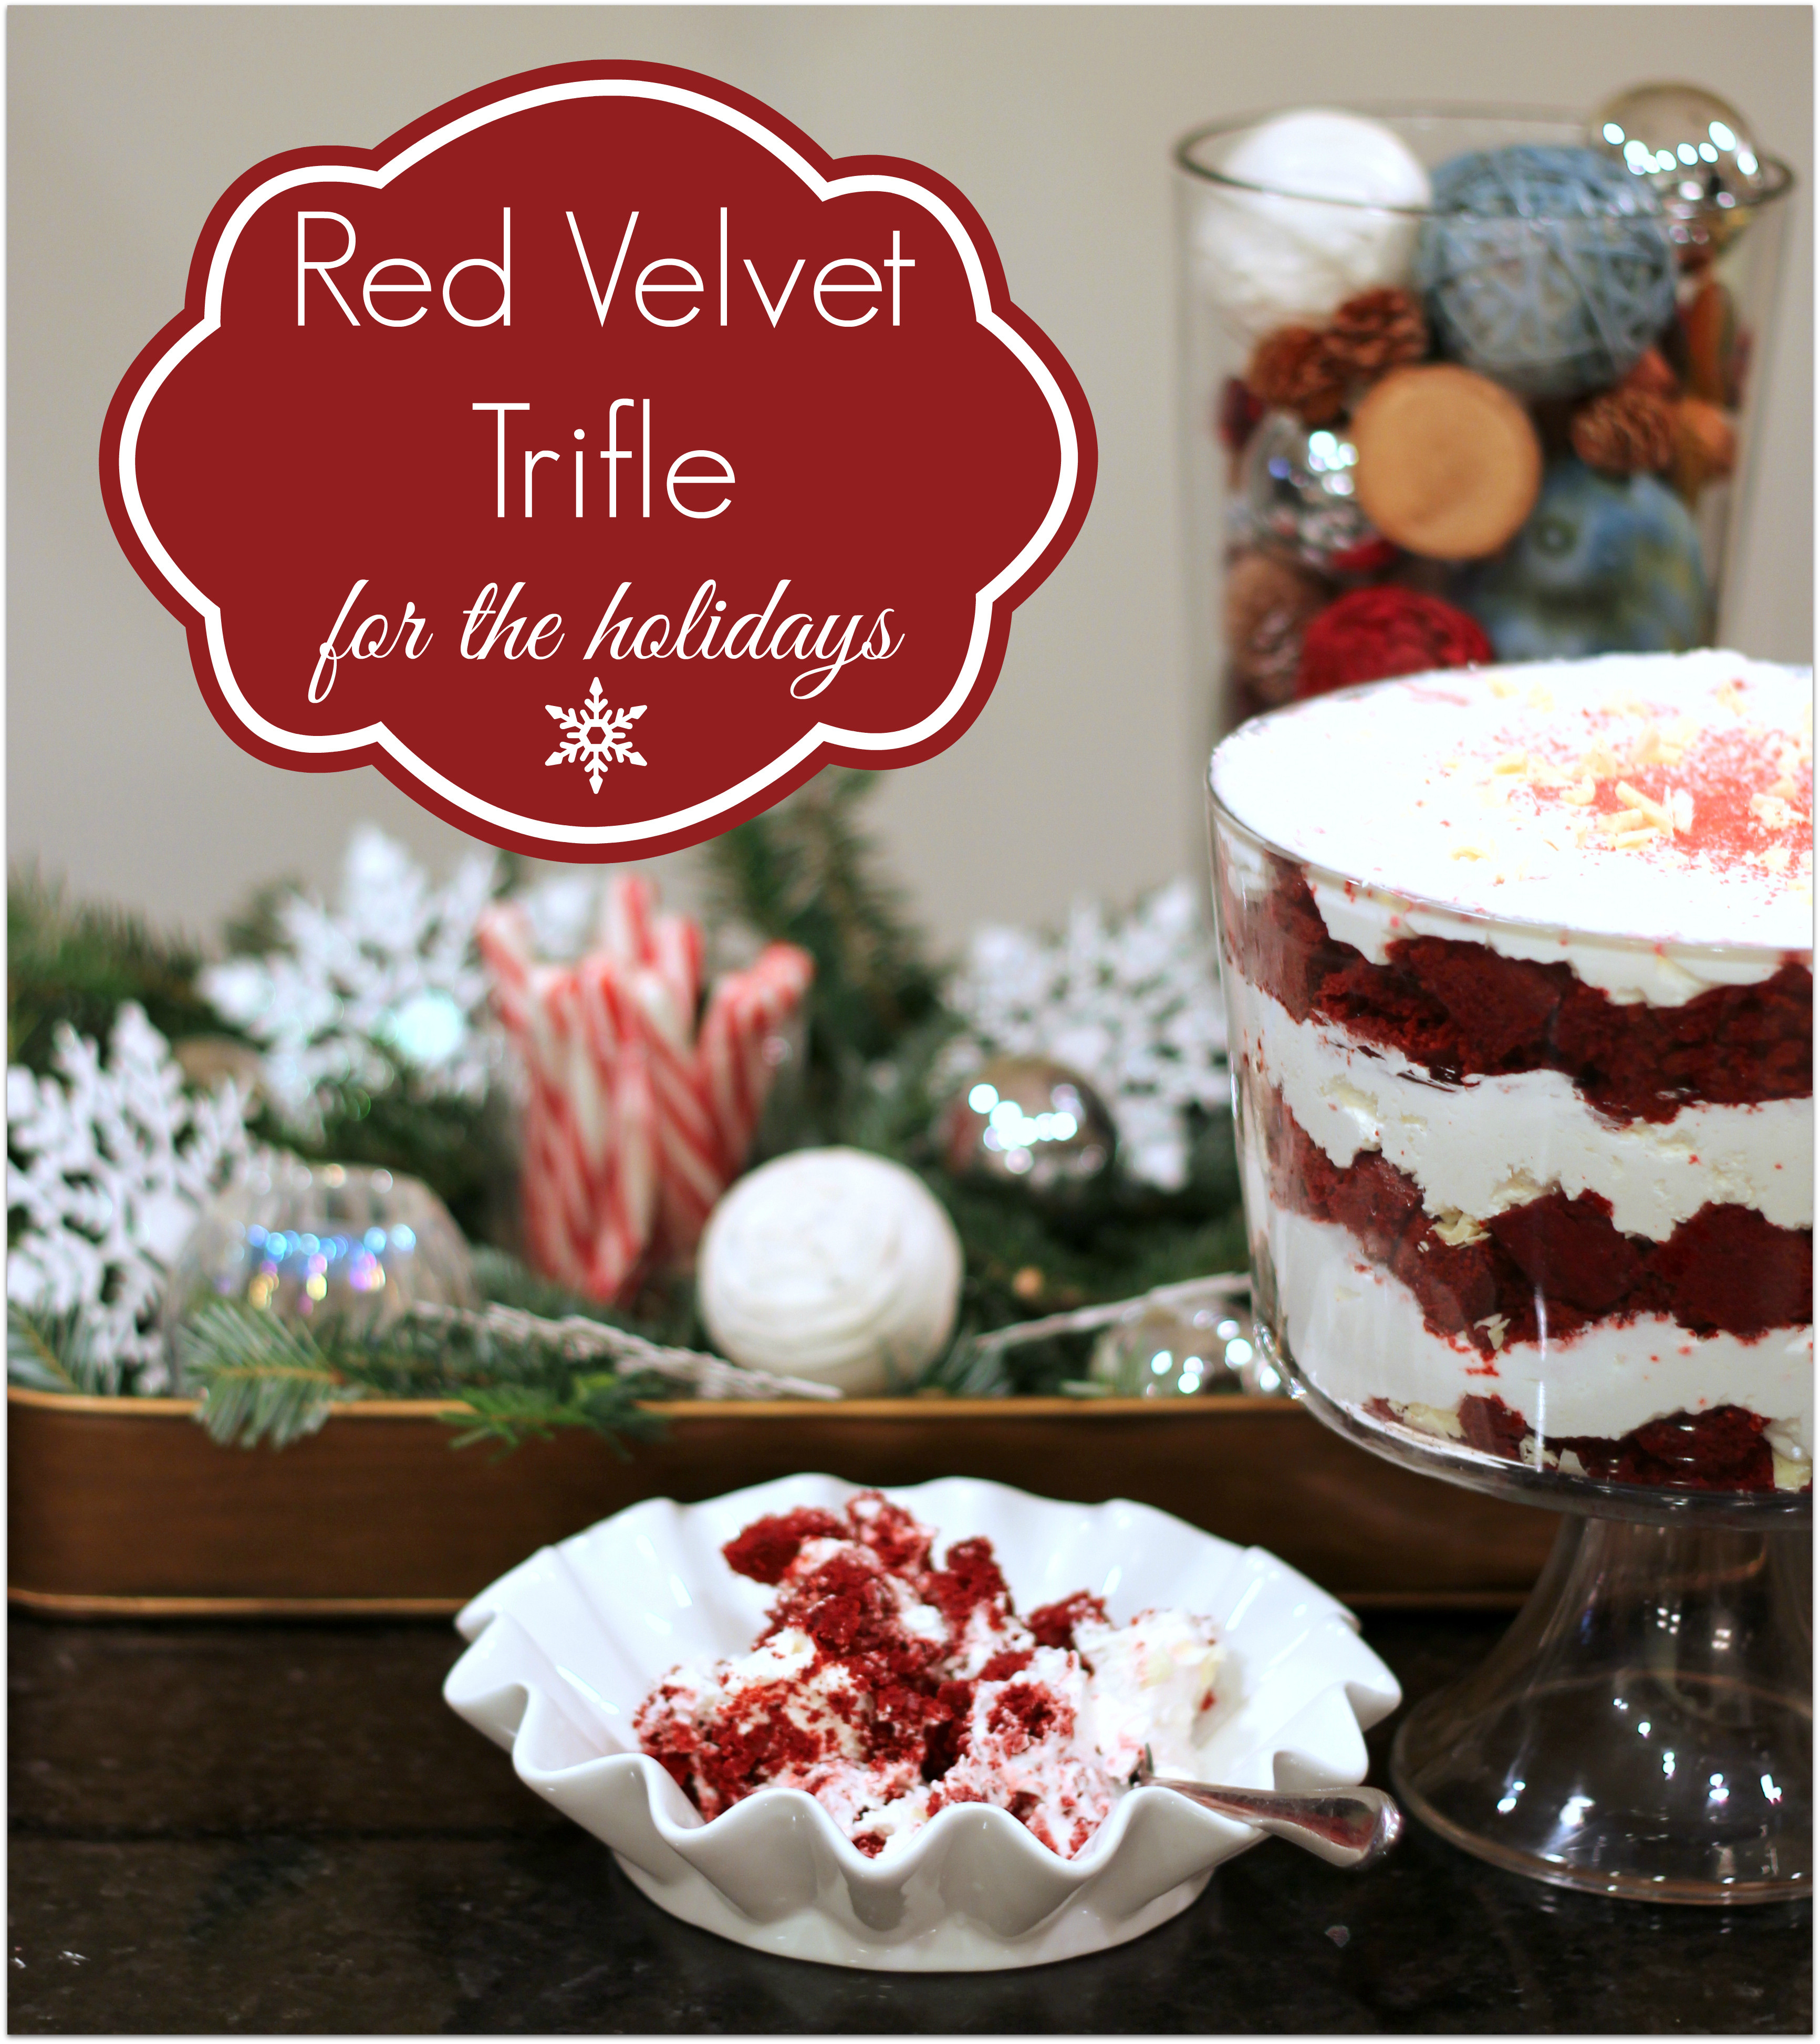 Cool Christmas Desserts
 Red Velvet Trifle a recipe for the holidays Artsy